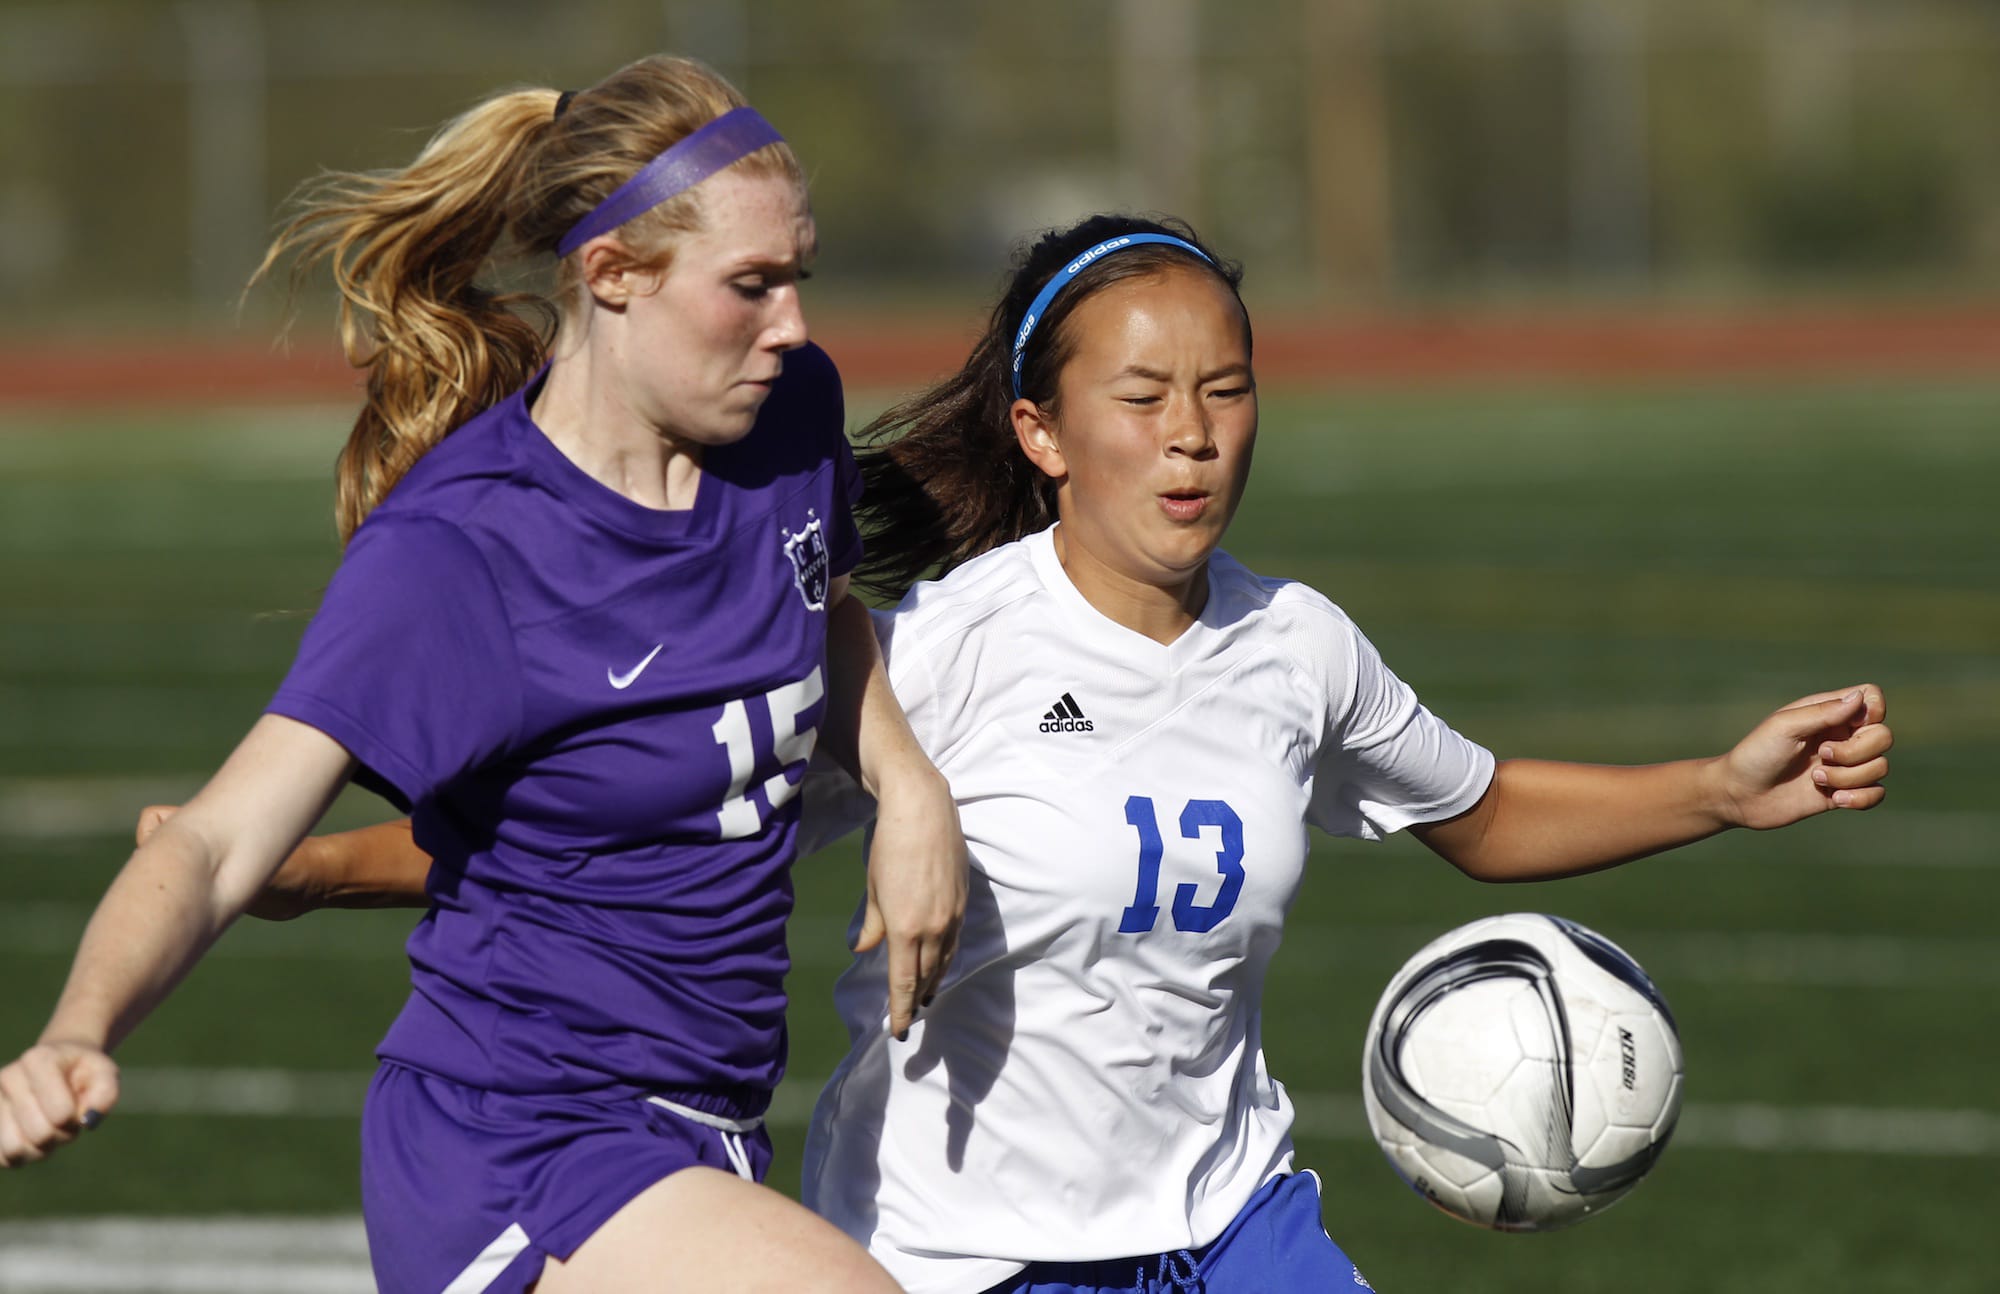 Mountain View's Lilah Favour (13) and Columbia River's Katie Anthony (15) battle for the ball in girls soccer.